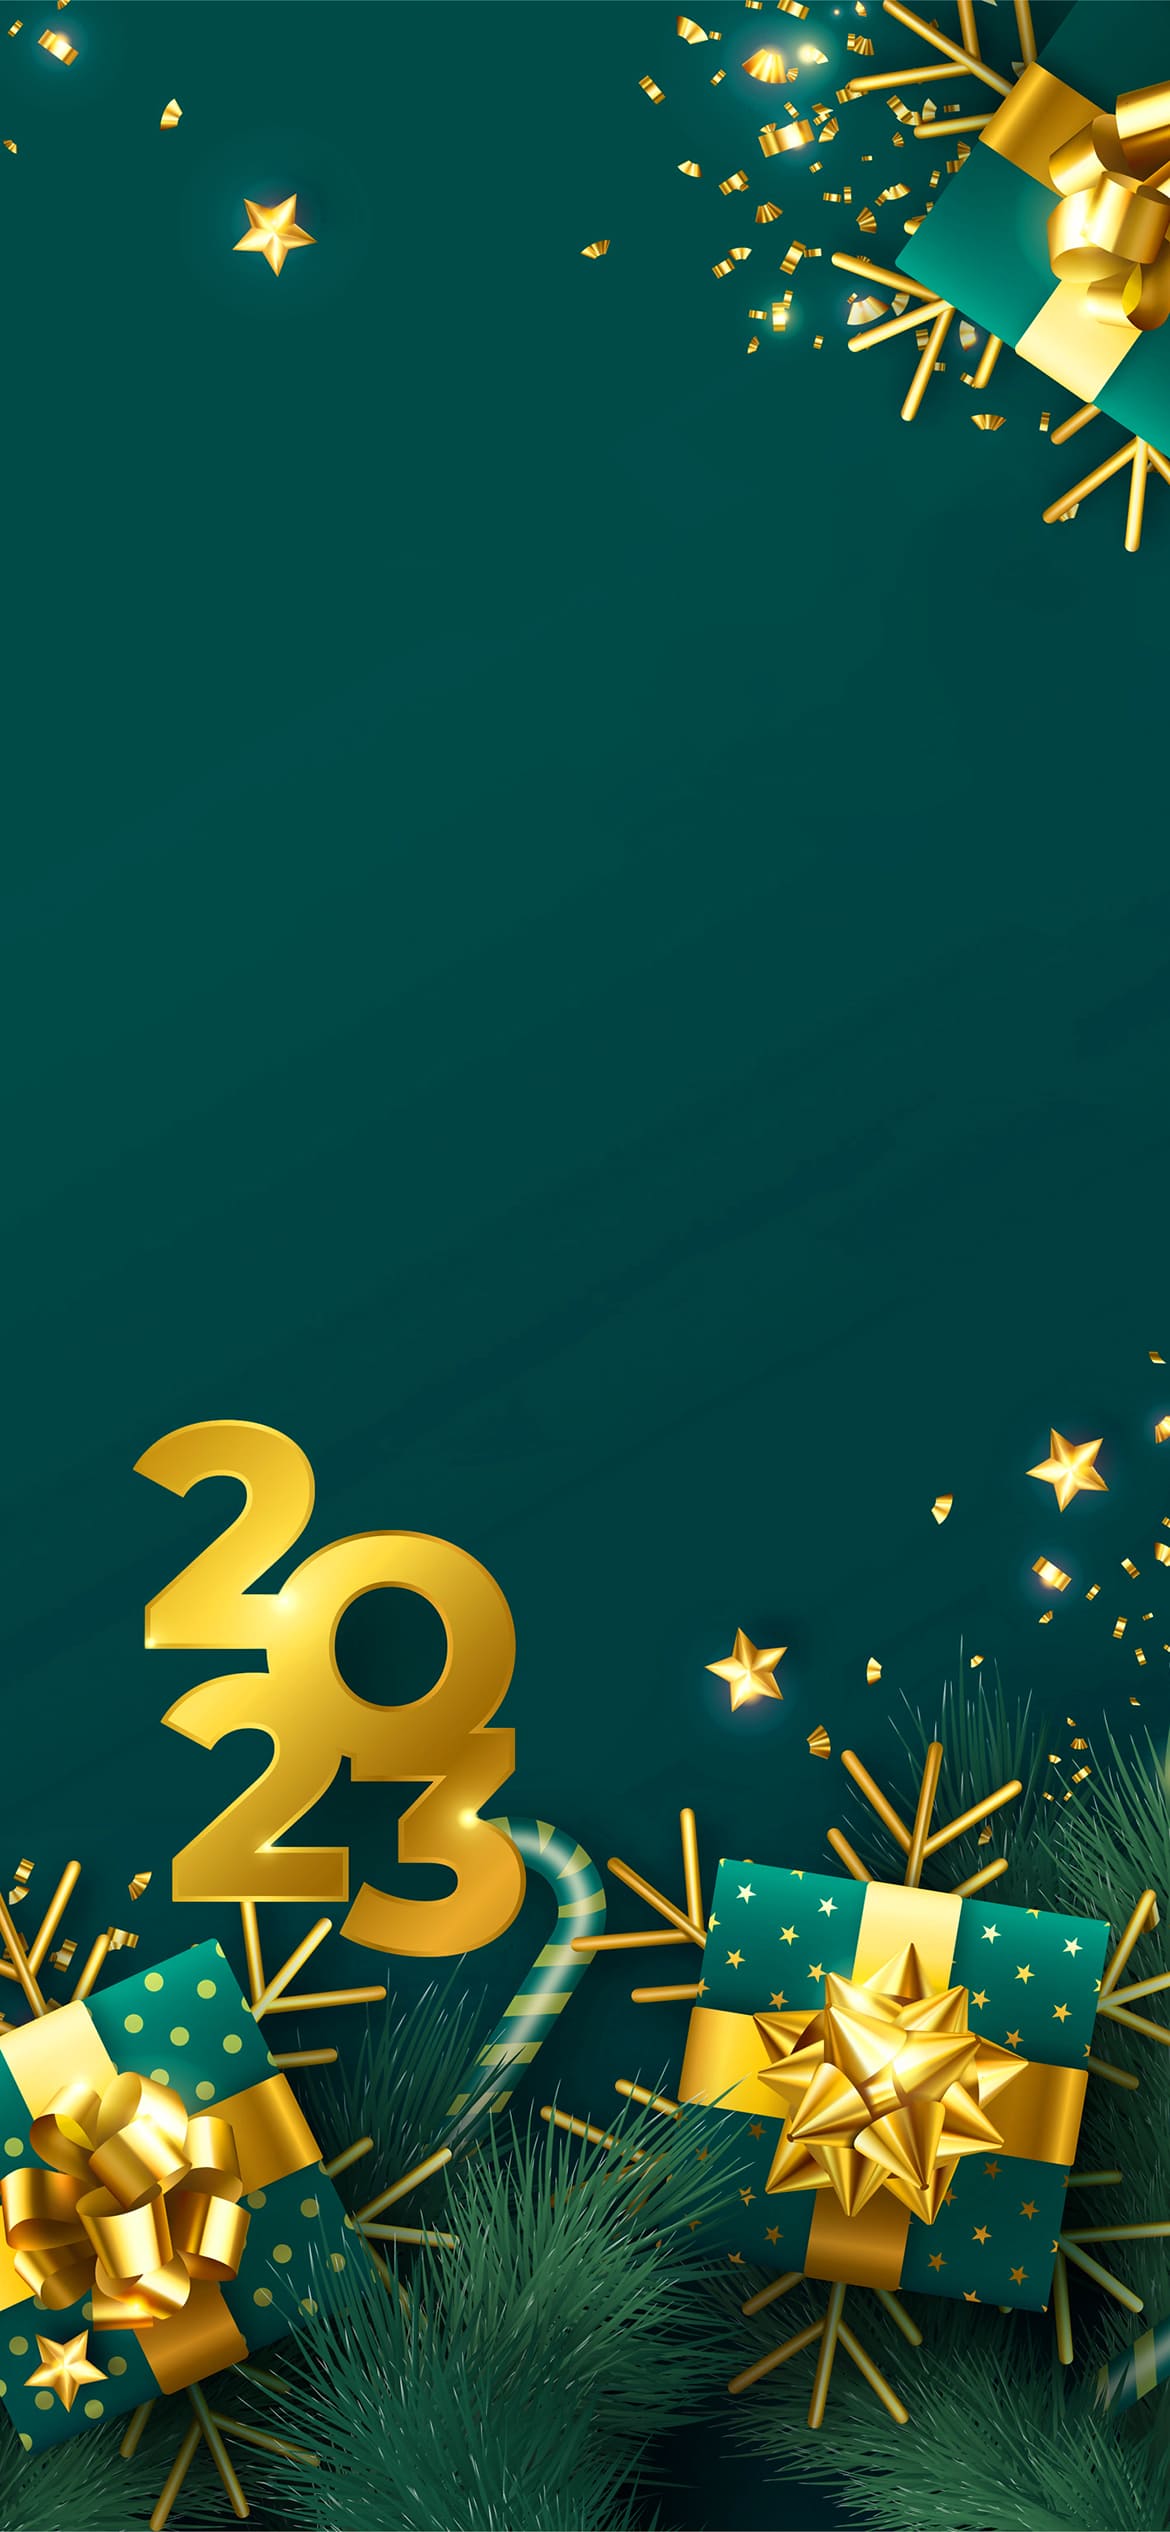 2023 New Year Wallpapers